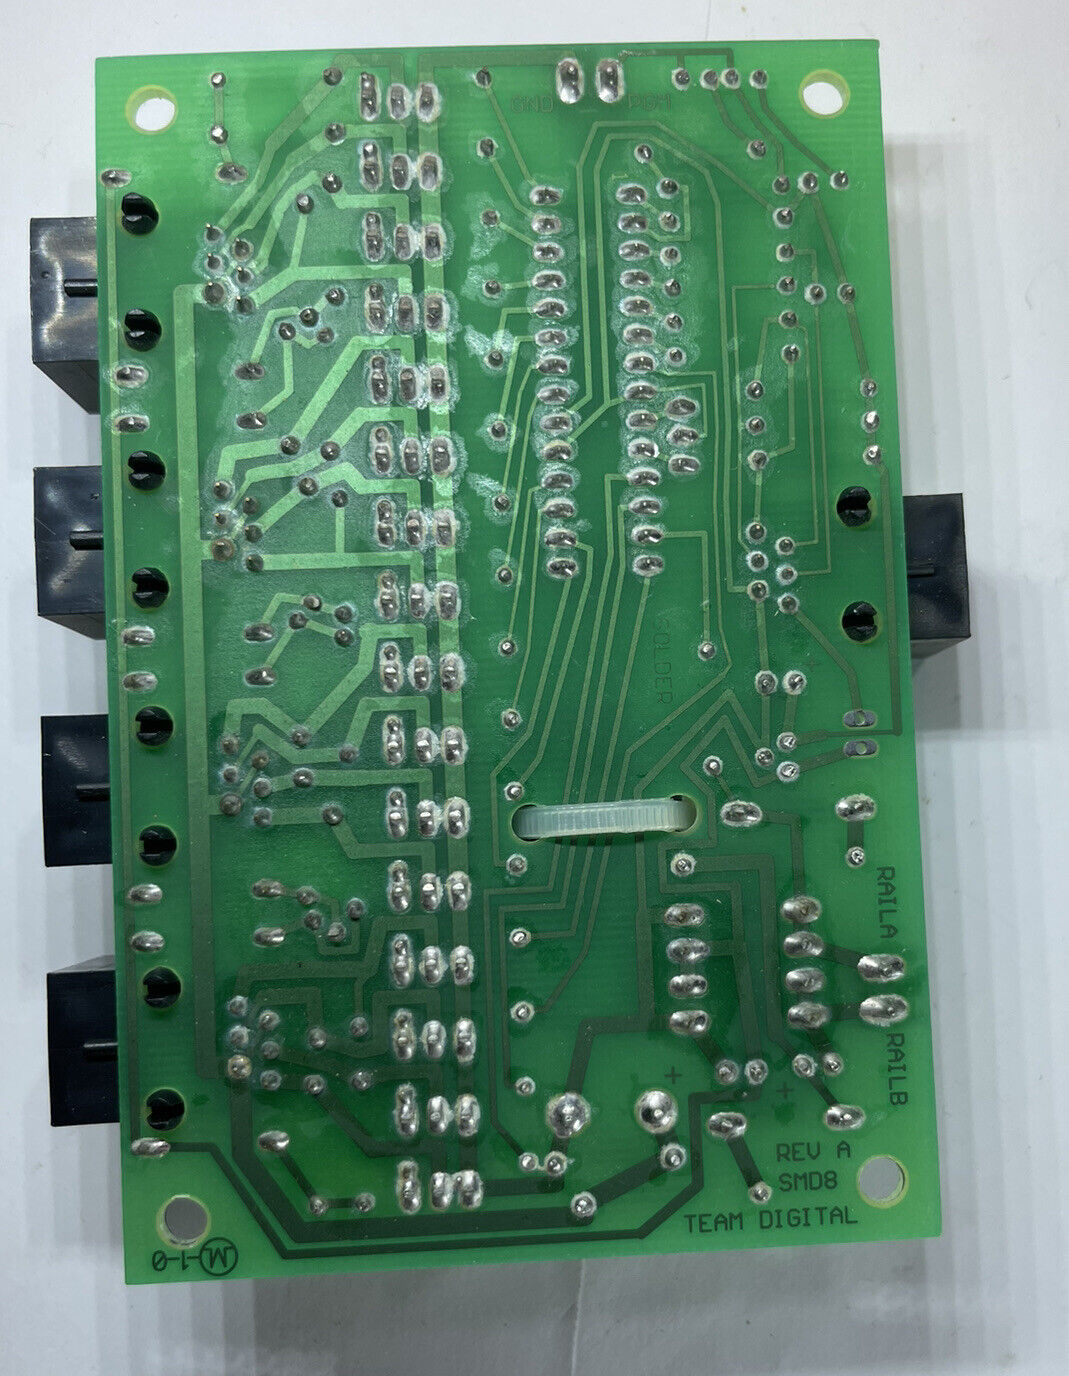 Team Digital SMD8 DCC Board. Great Condition.